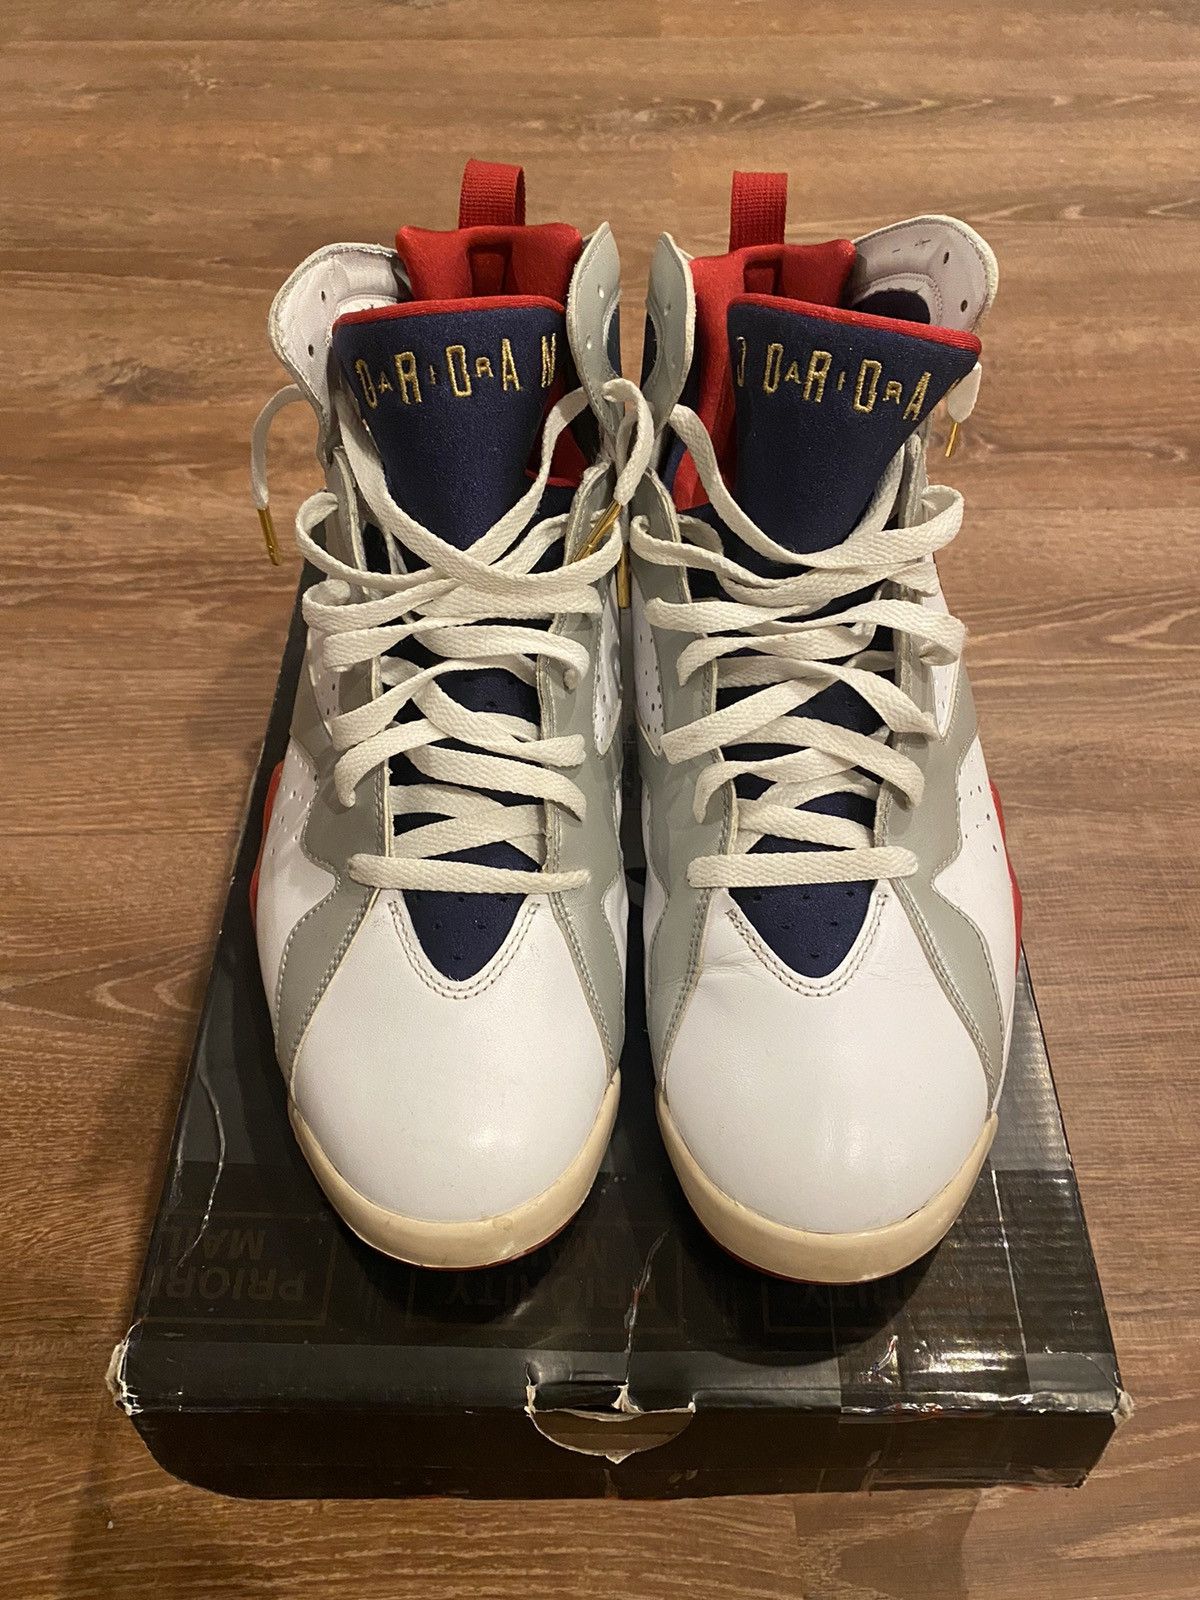 Nike Jordan 7 “For the Love of the Game” 2010 Size US 12 / EU 45 - 2 Preview